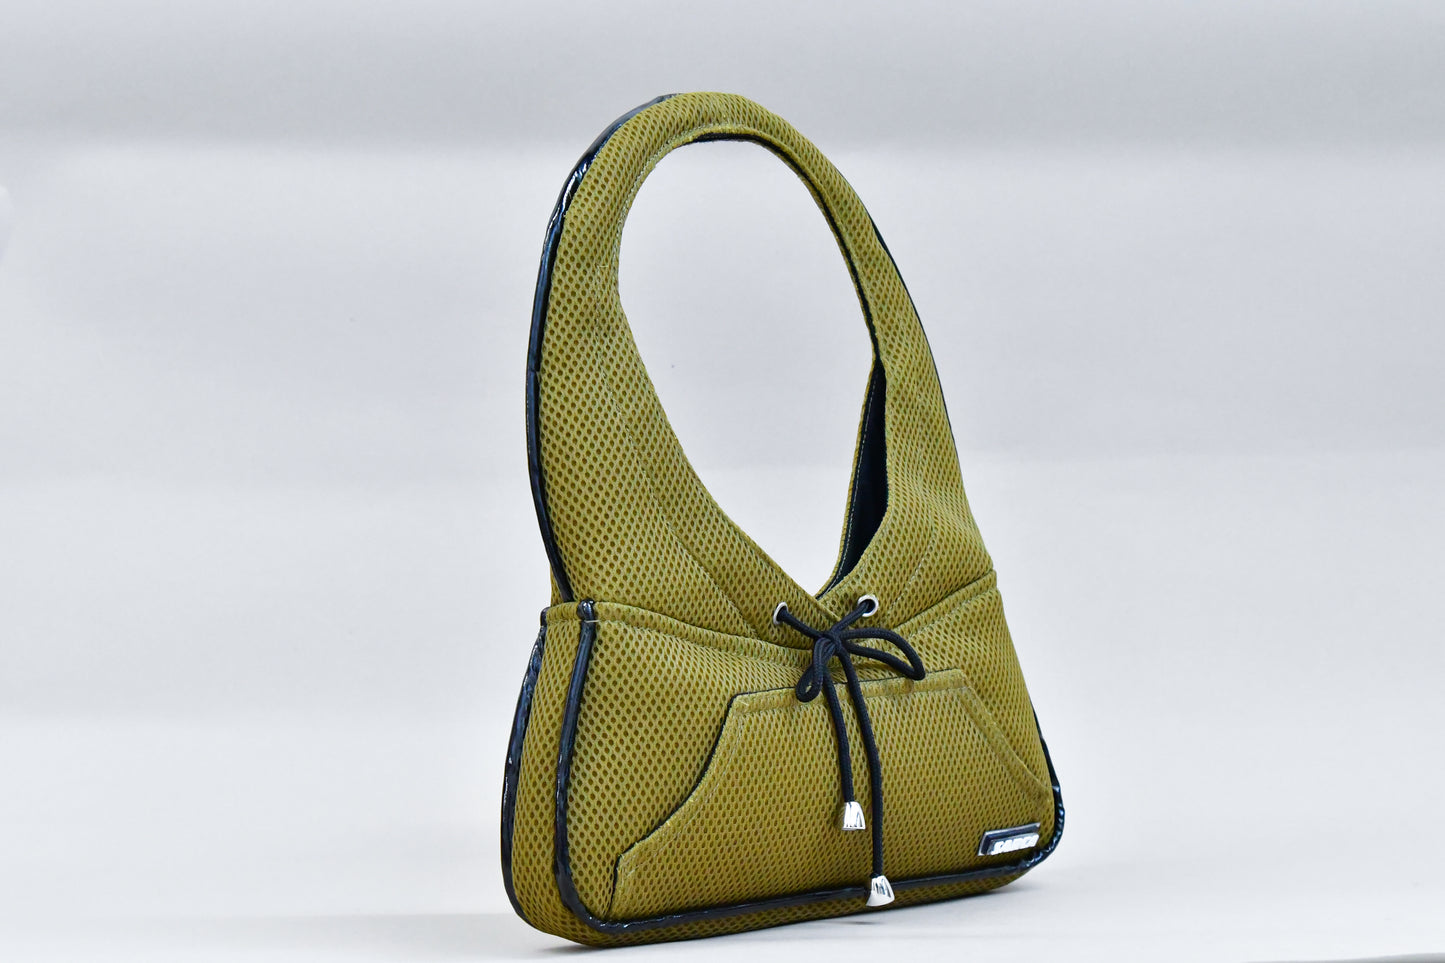 'HOODIE' OLIVE HANDBAG WITH DRAWSTRINGS AND FRONT POCKET.